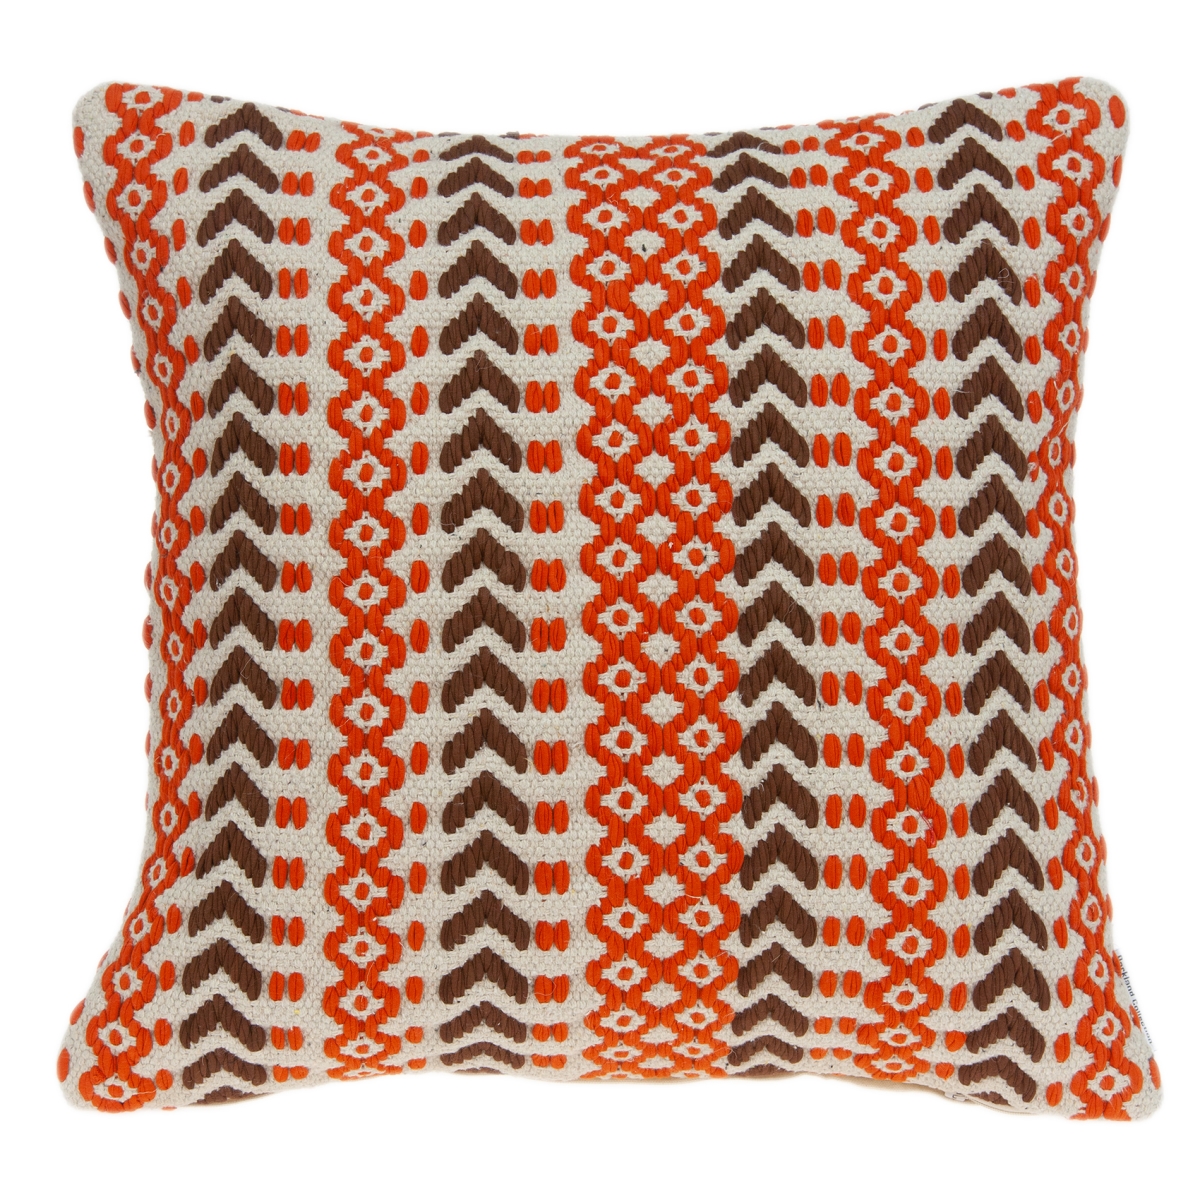 Pild11125p Larka Orange, Tan & Brown Square Bohemian Pillow Cover With Poly Insert - 20 X 20 X 7 In.